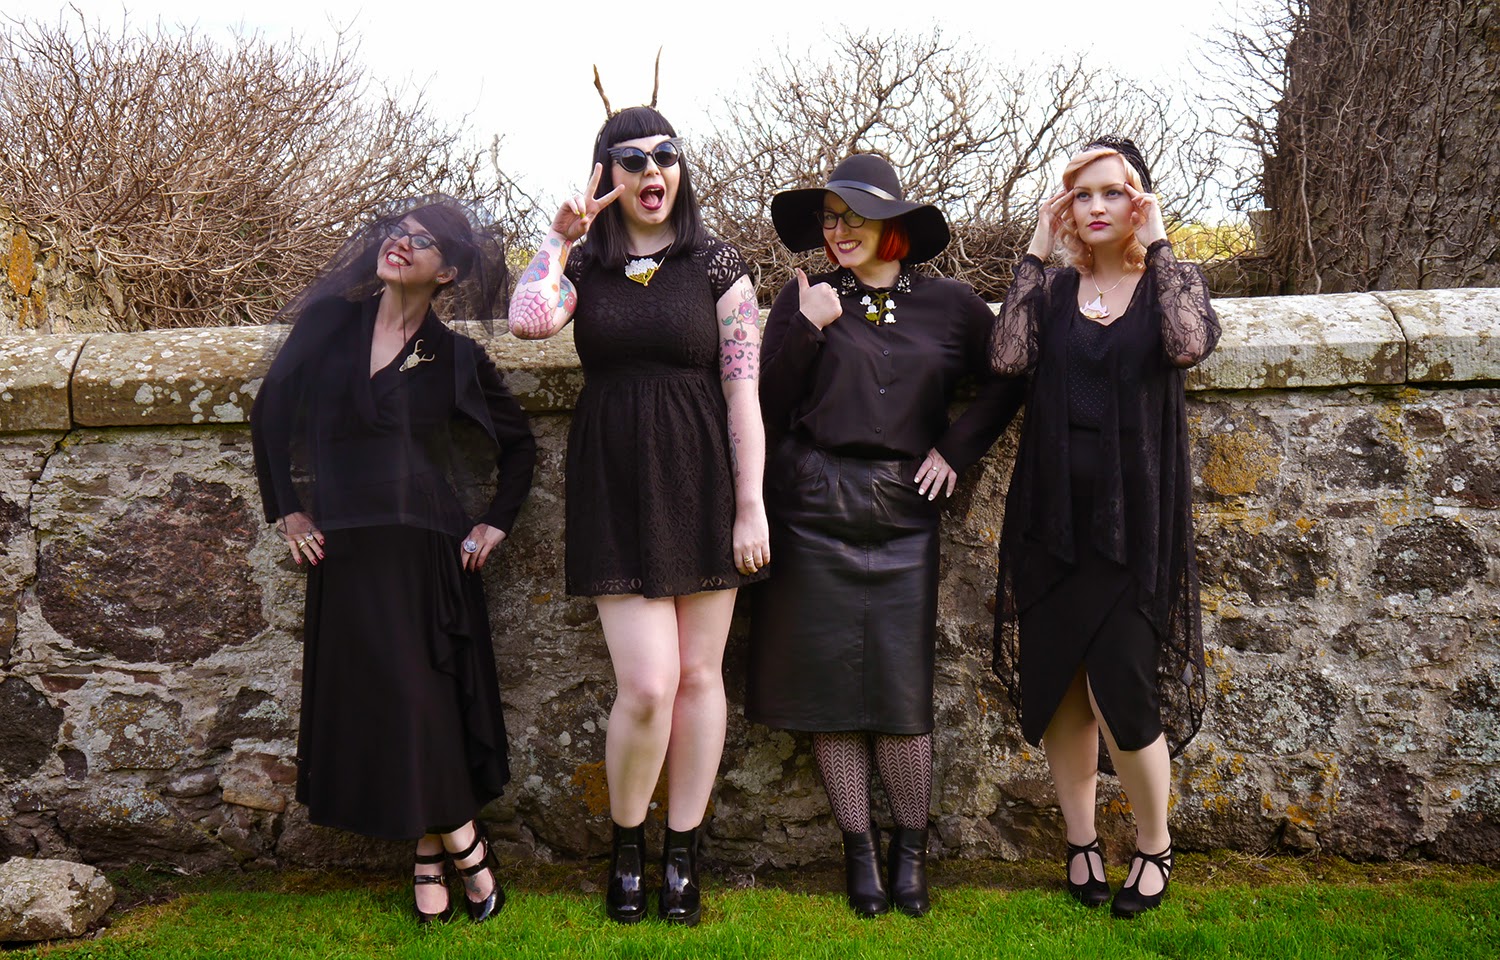 Wardrobe Conversations: Halloween Girl Gang: Where My Witches At?